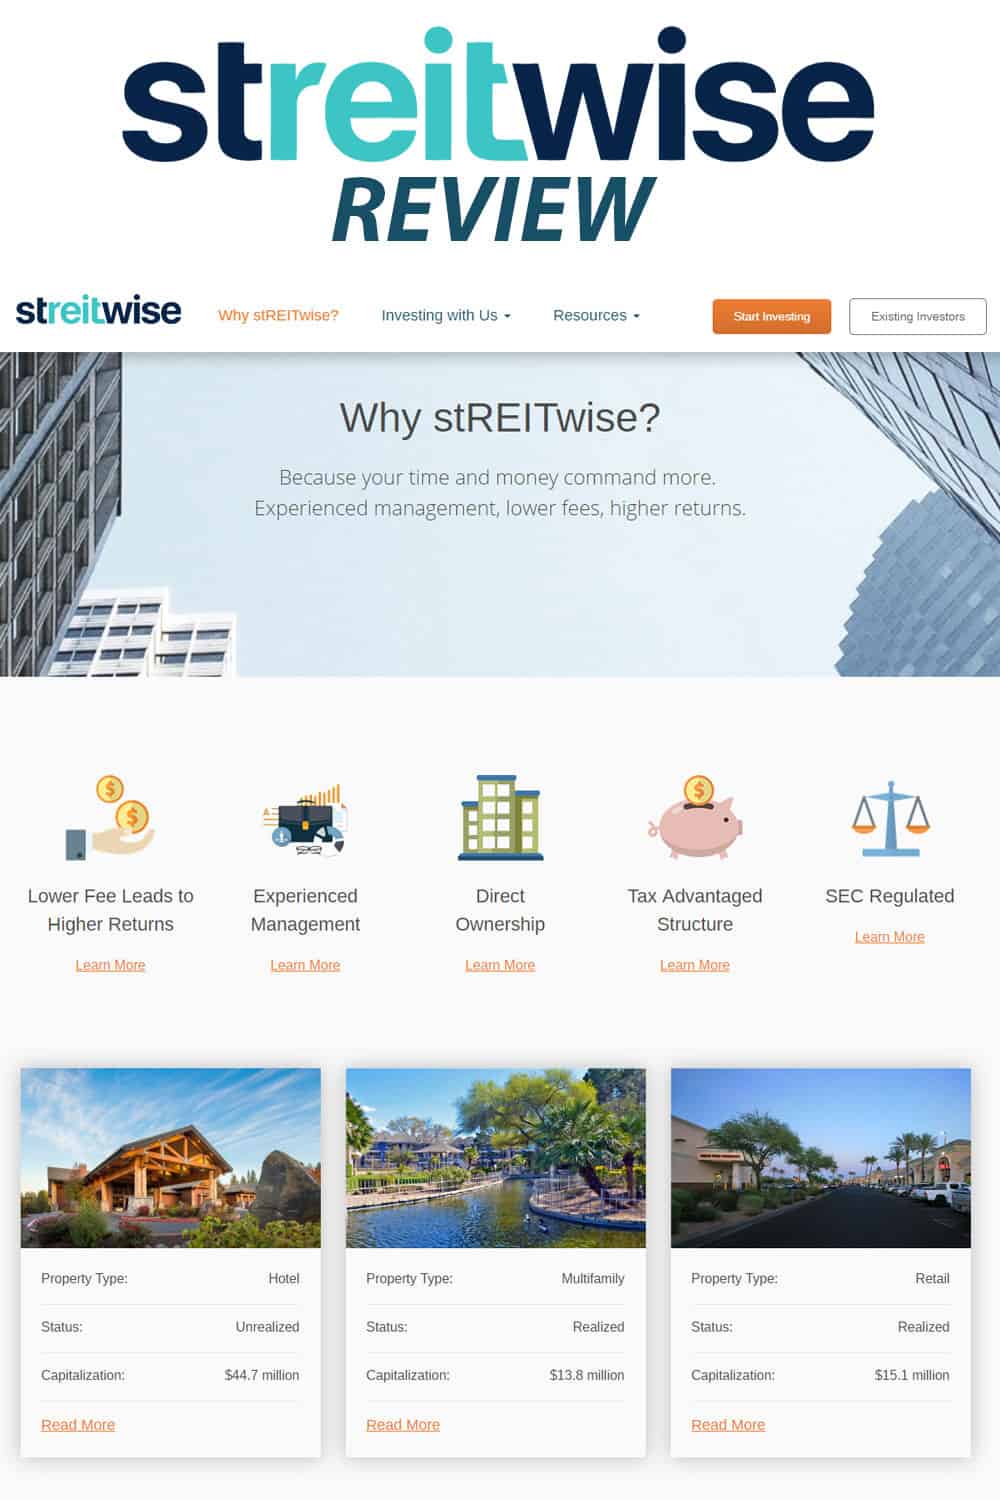 Streitwise review